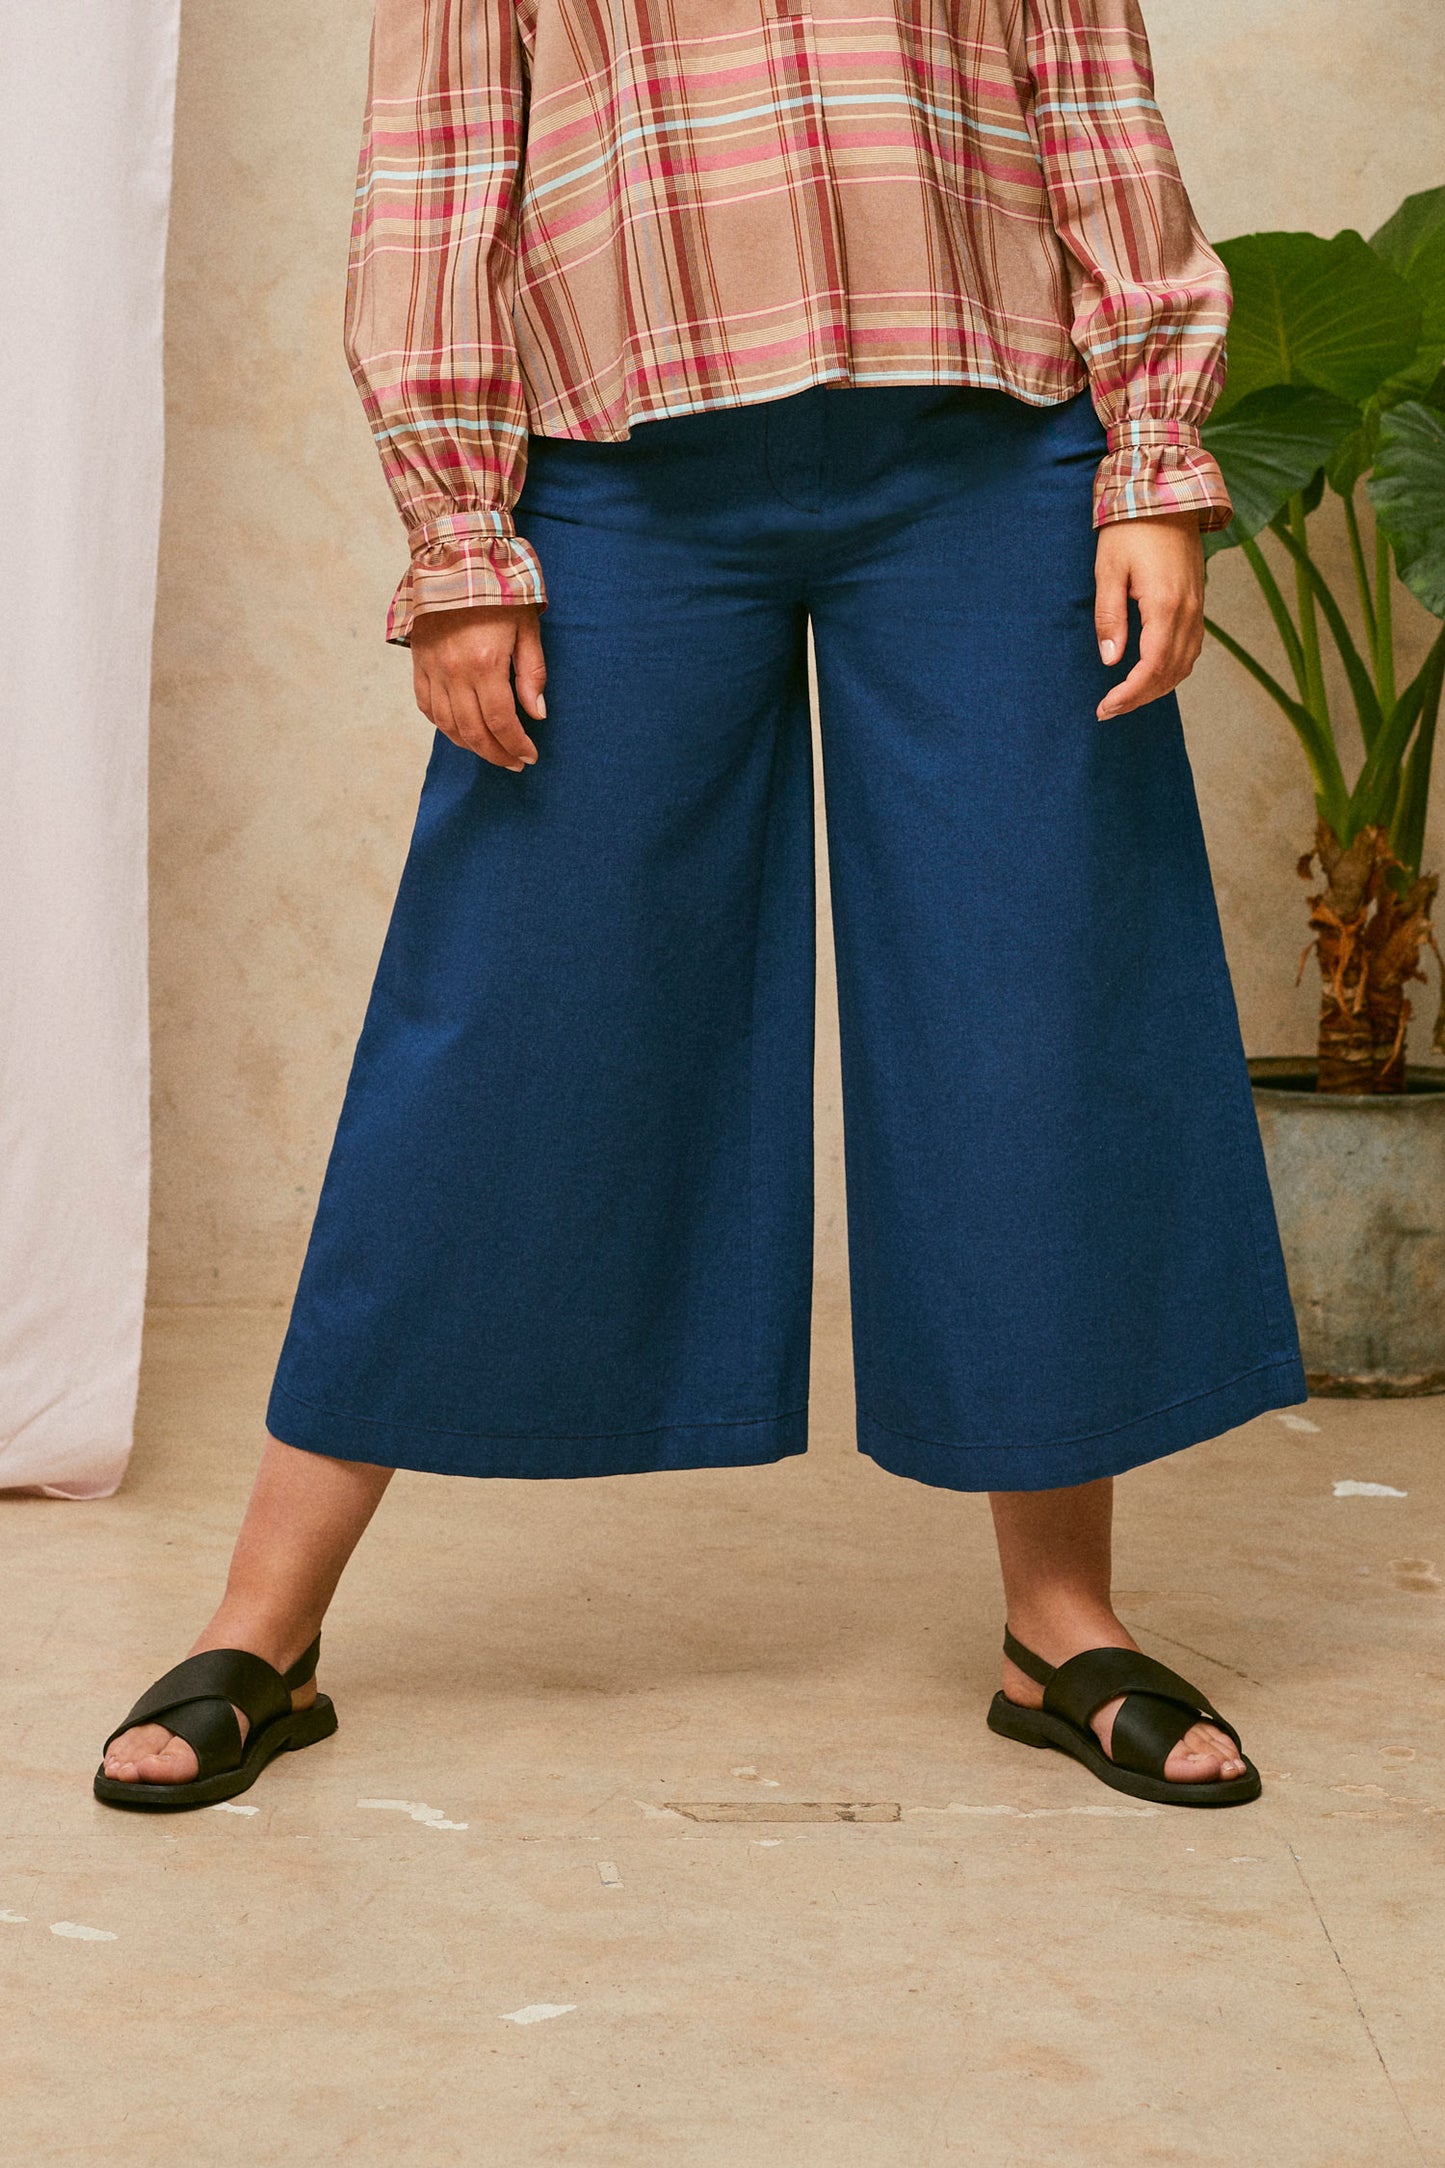 Close up of model wearing Saywood's Amelia denim trousers, wide leg culotte shape in Japanese denim, with black sandals. Worn with the pink check blouse, Marie a-line-shirt. A plant and drop of pink fabric can be seen in the background.